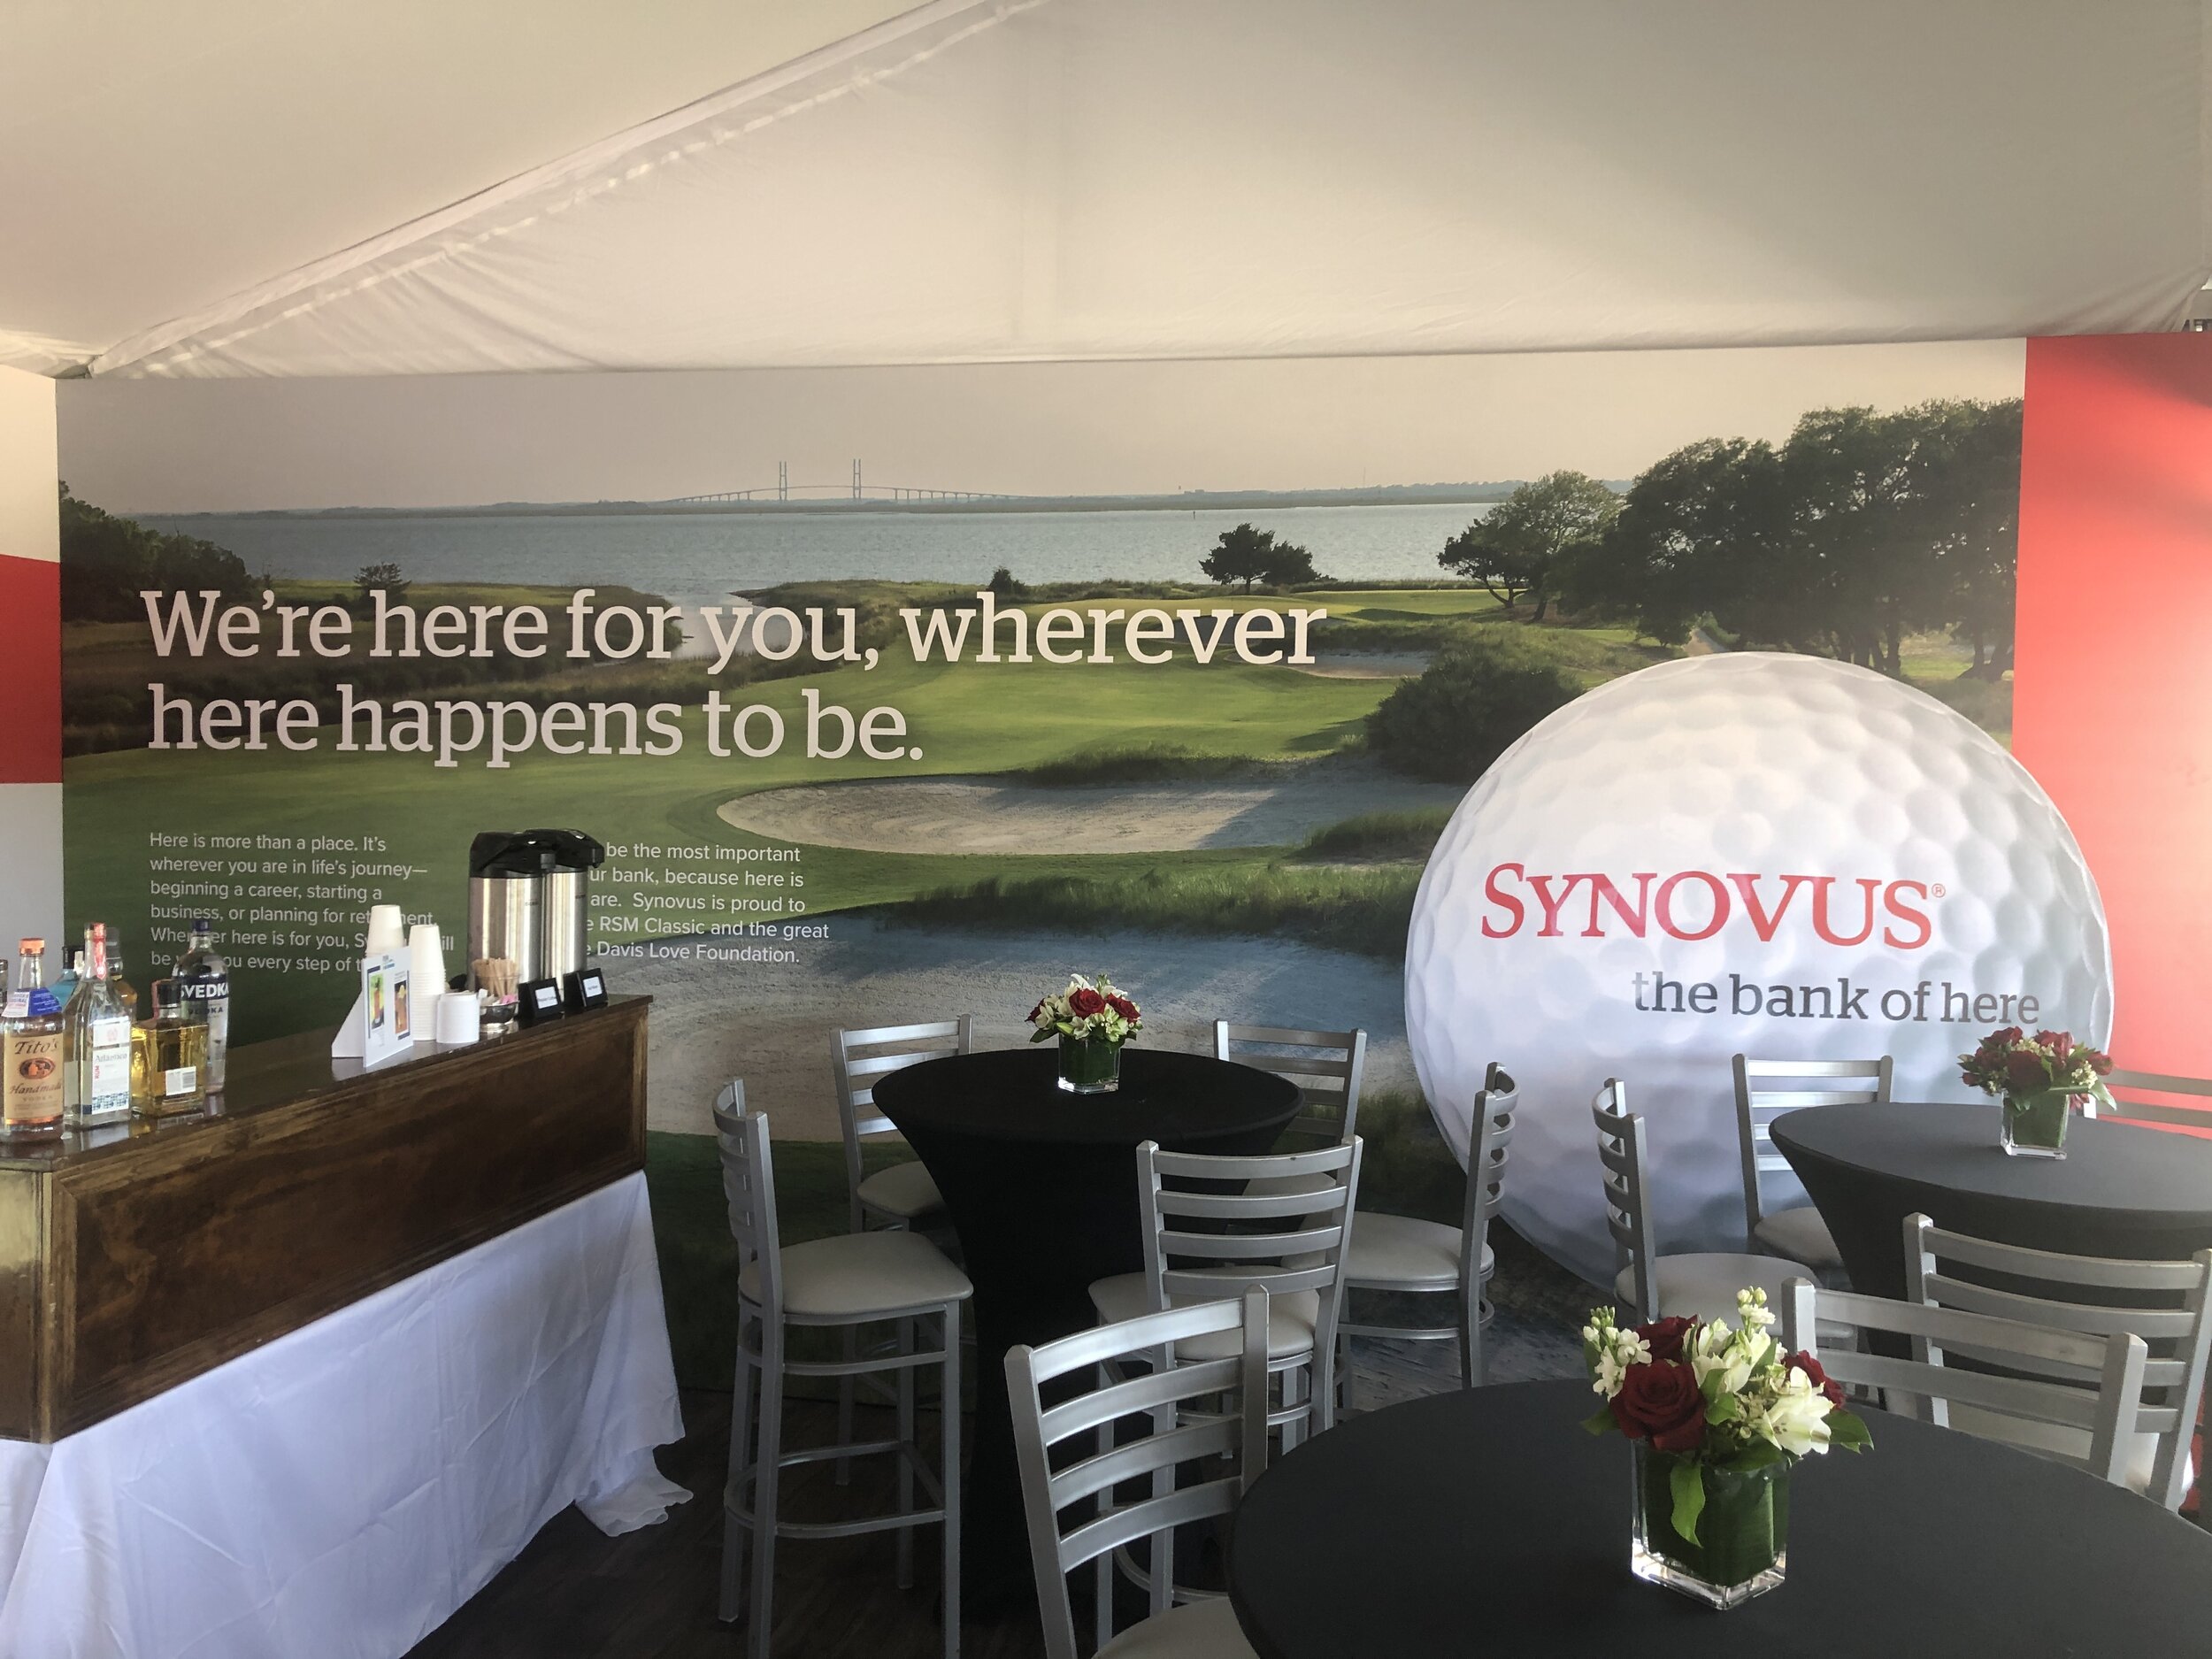 Hospitality management at the 2018 RSM Classic in St. Simons Island, Georgia